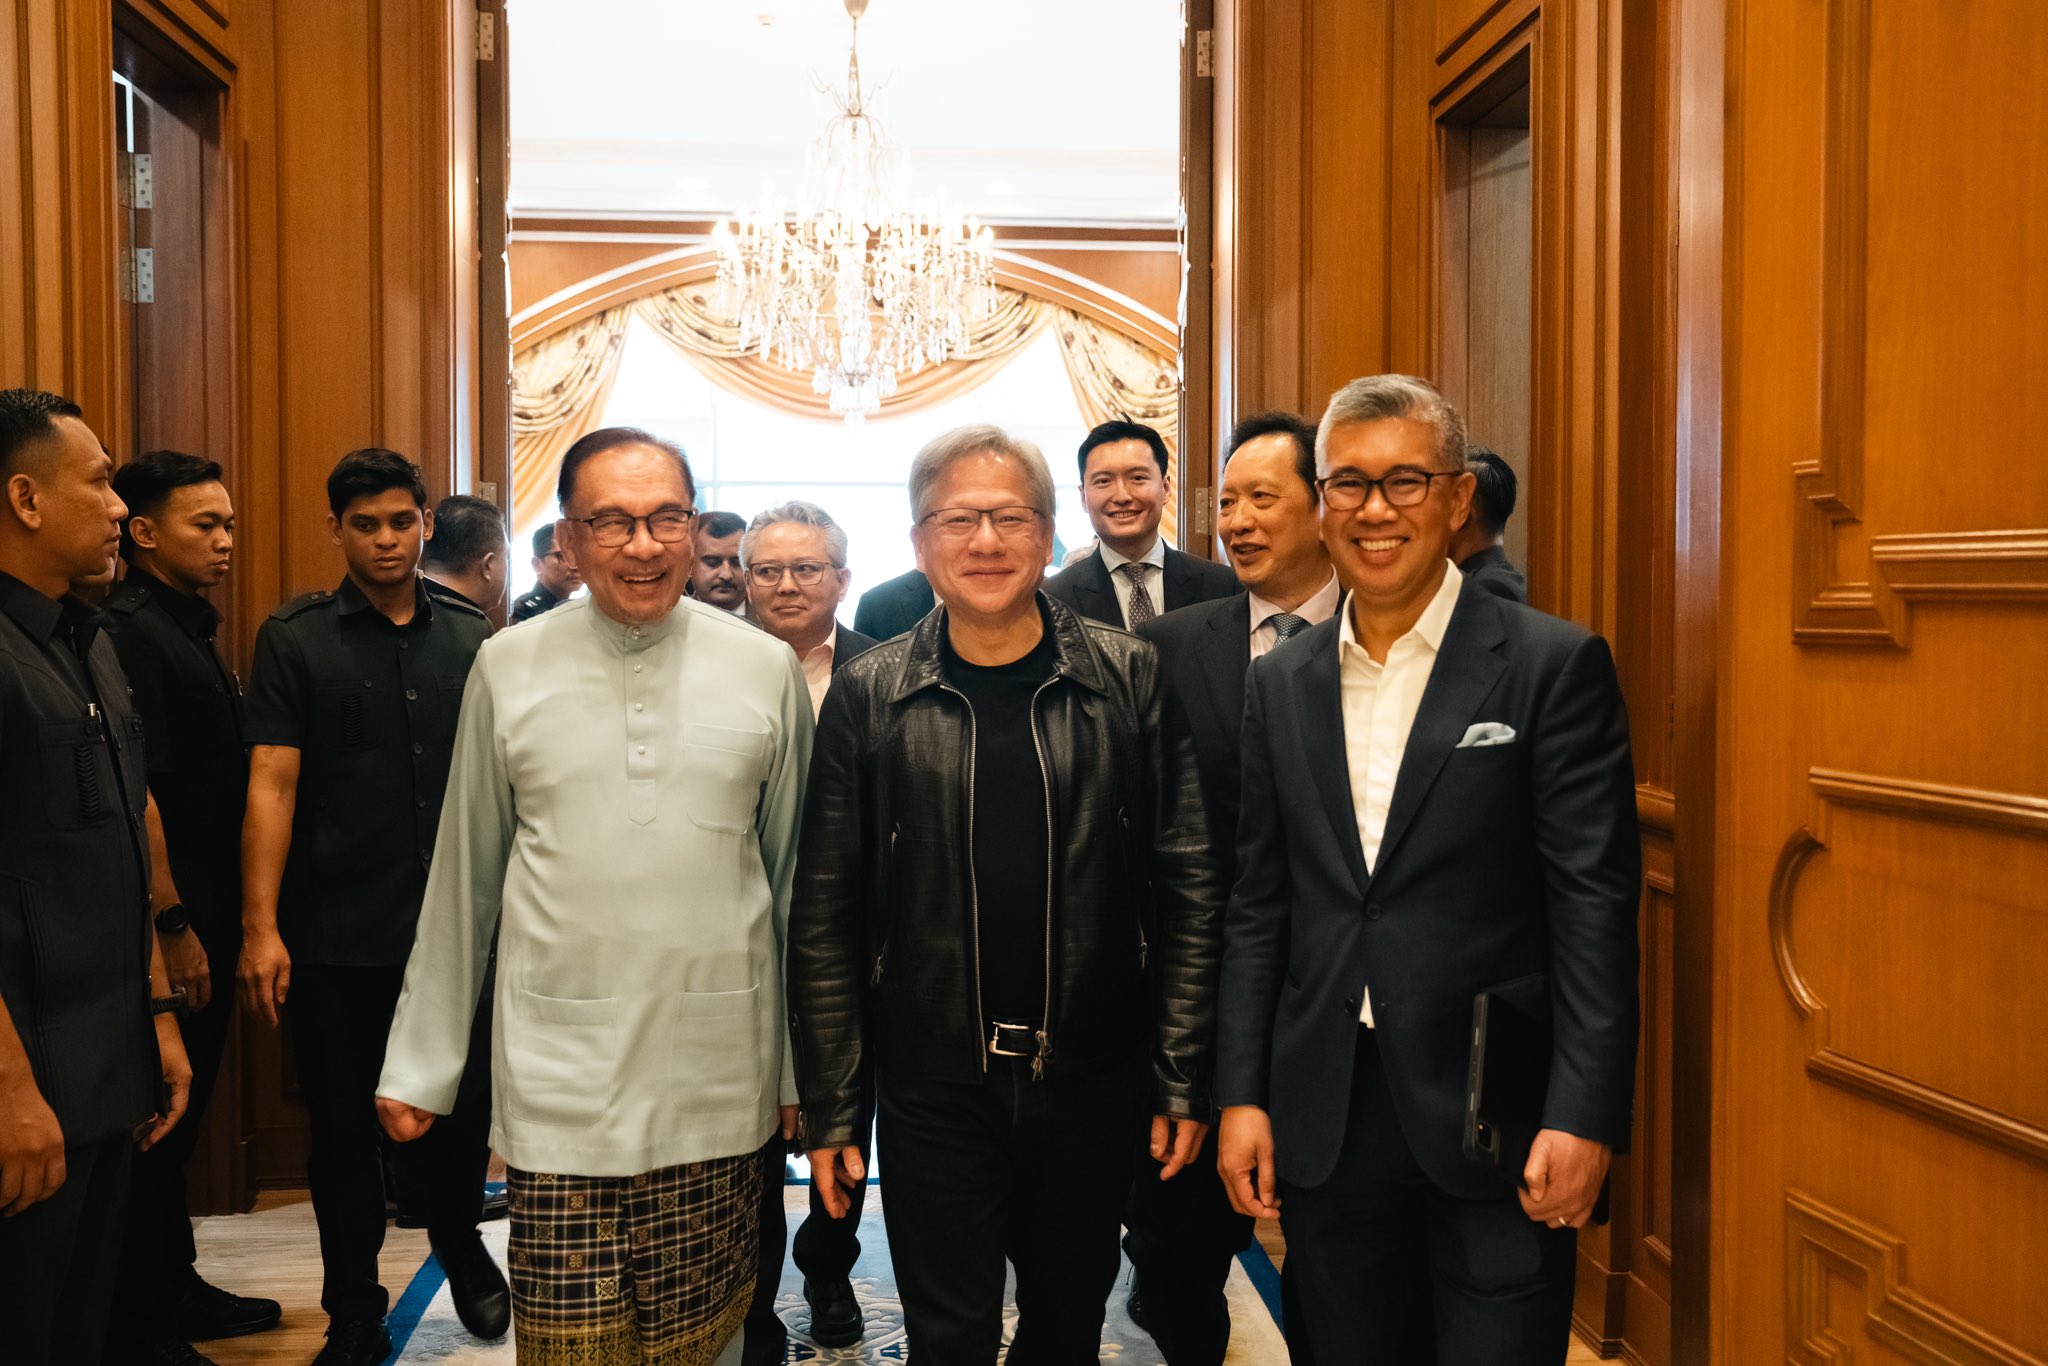 The CEO of Nvidia had just concluded his visits around Asia, focusing specifically on Southeast Asia. Photo: Tengku Zafrul's X.